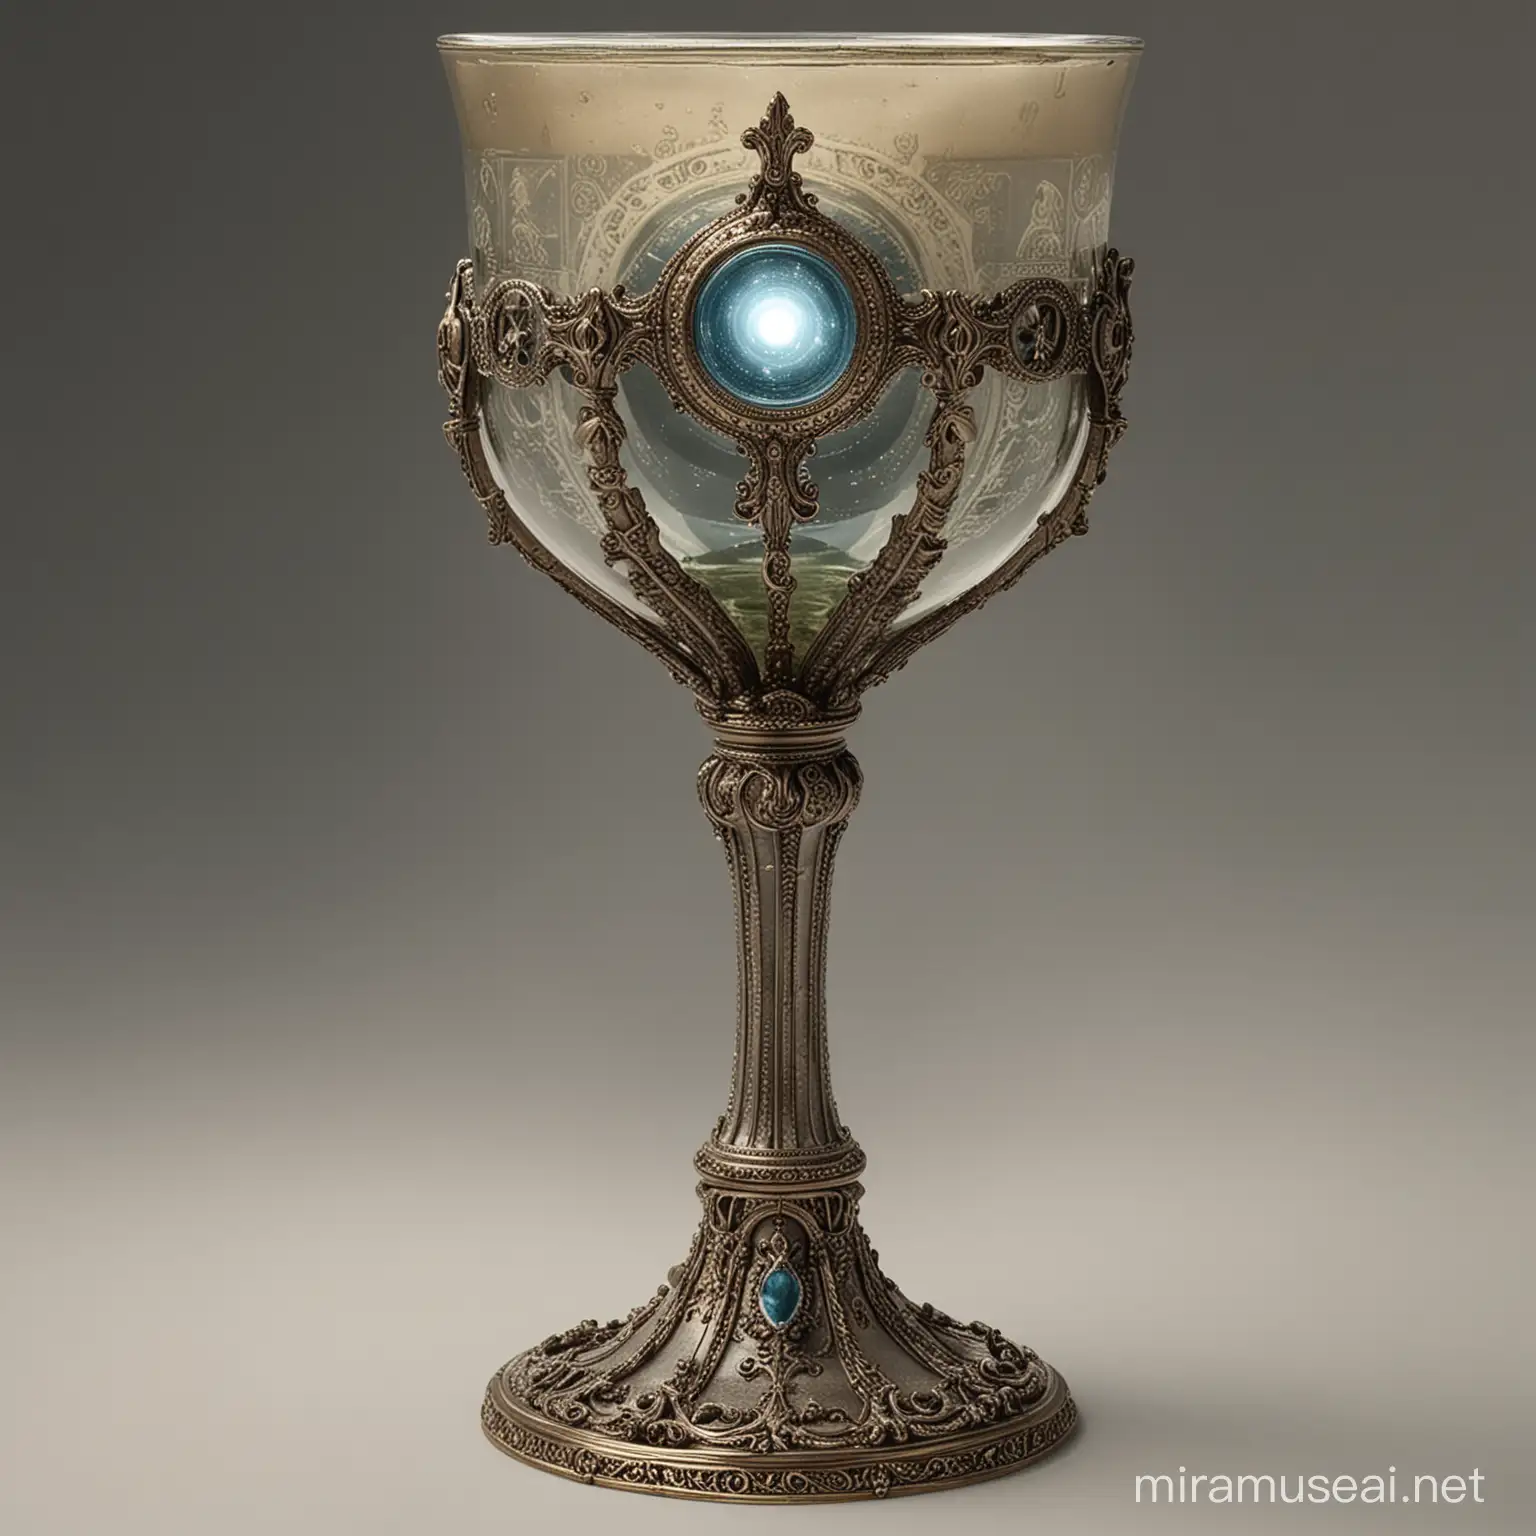 Ethereal Chalice: This chalice allows the user to drink visions of the past, granting insight into historical events or the lives of the deceased.